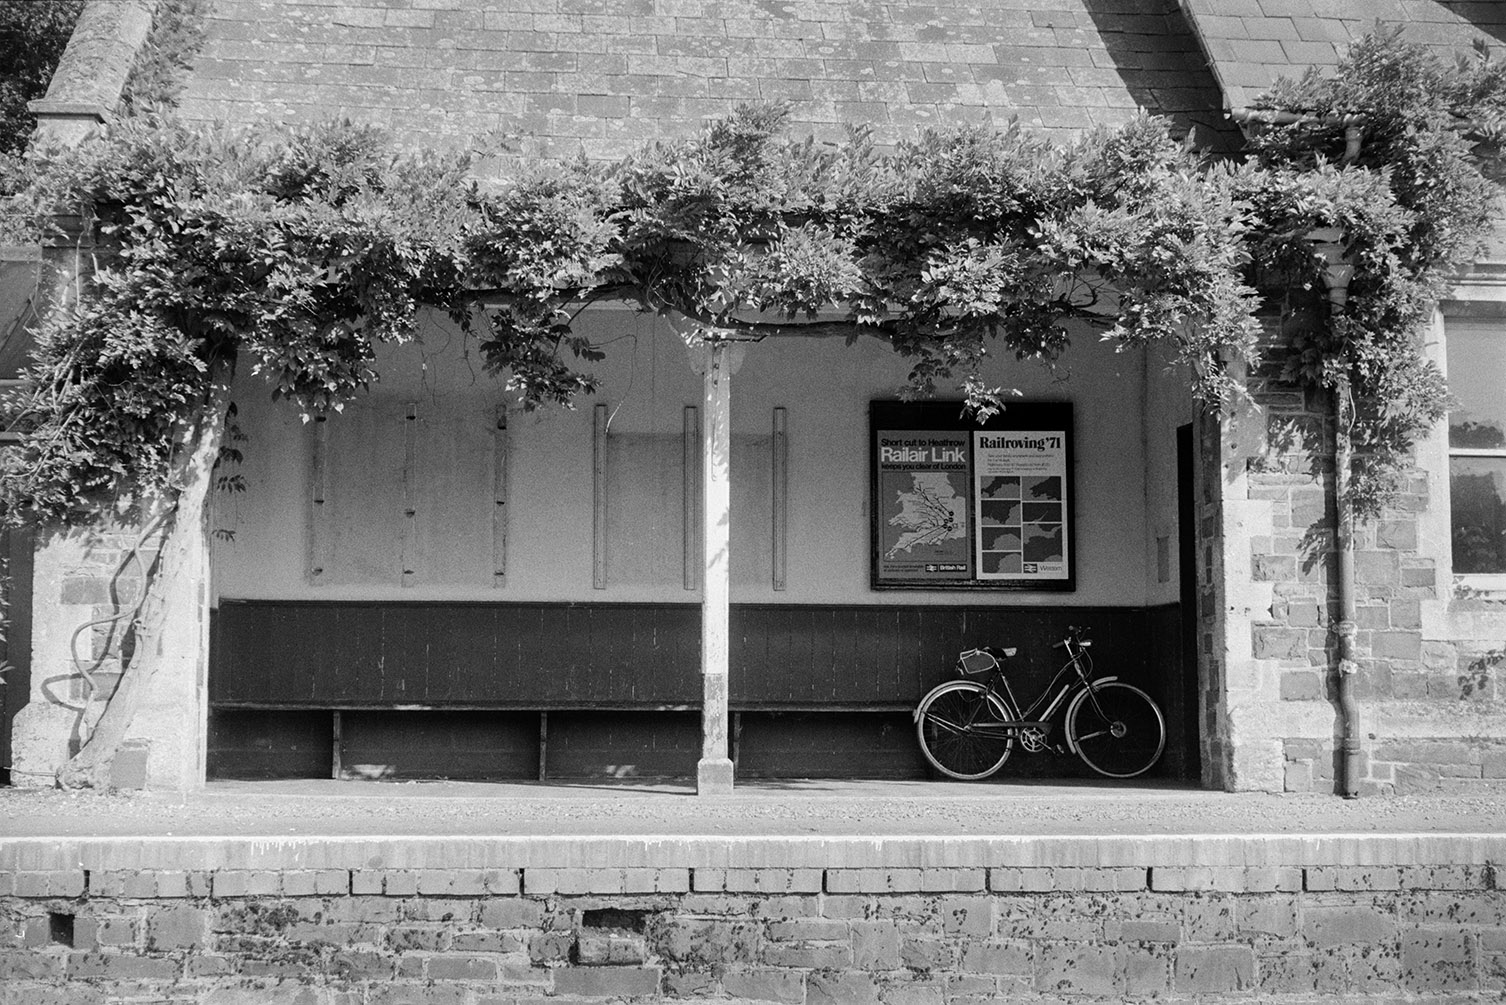 A shelter on the platform at Eggesford Railway Station. A bicycle and posters are inside the shelter which also has a vine growing up it.